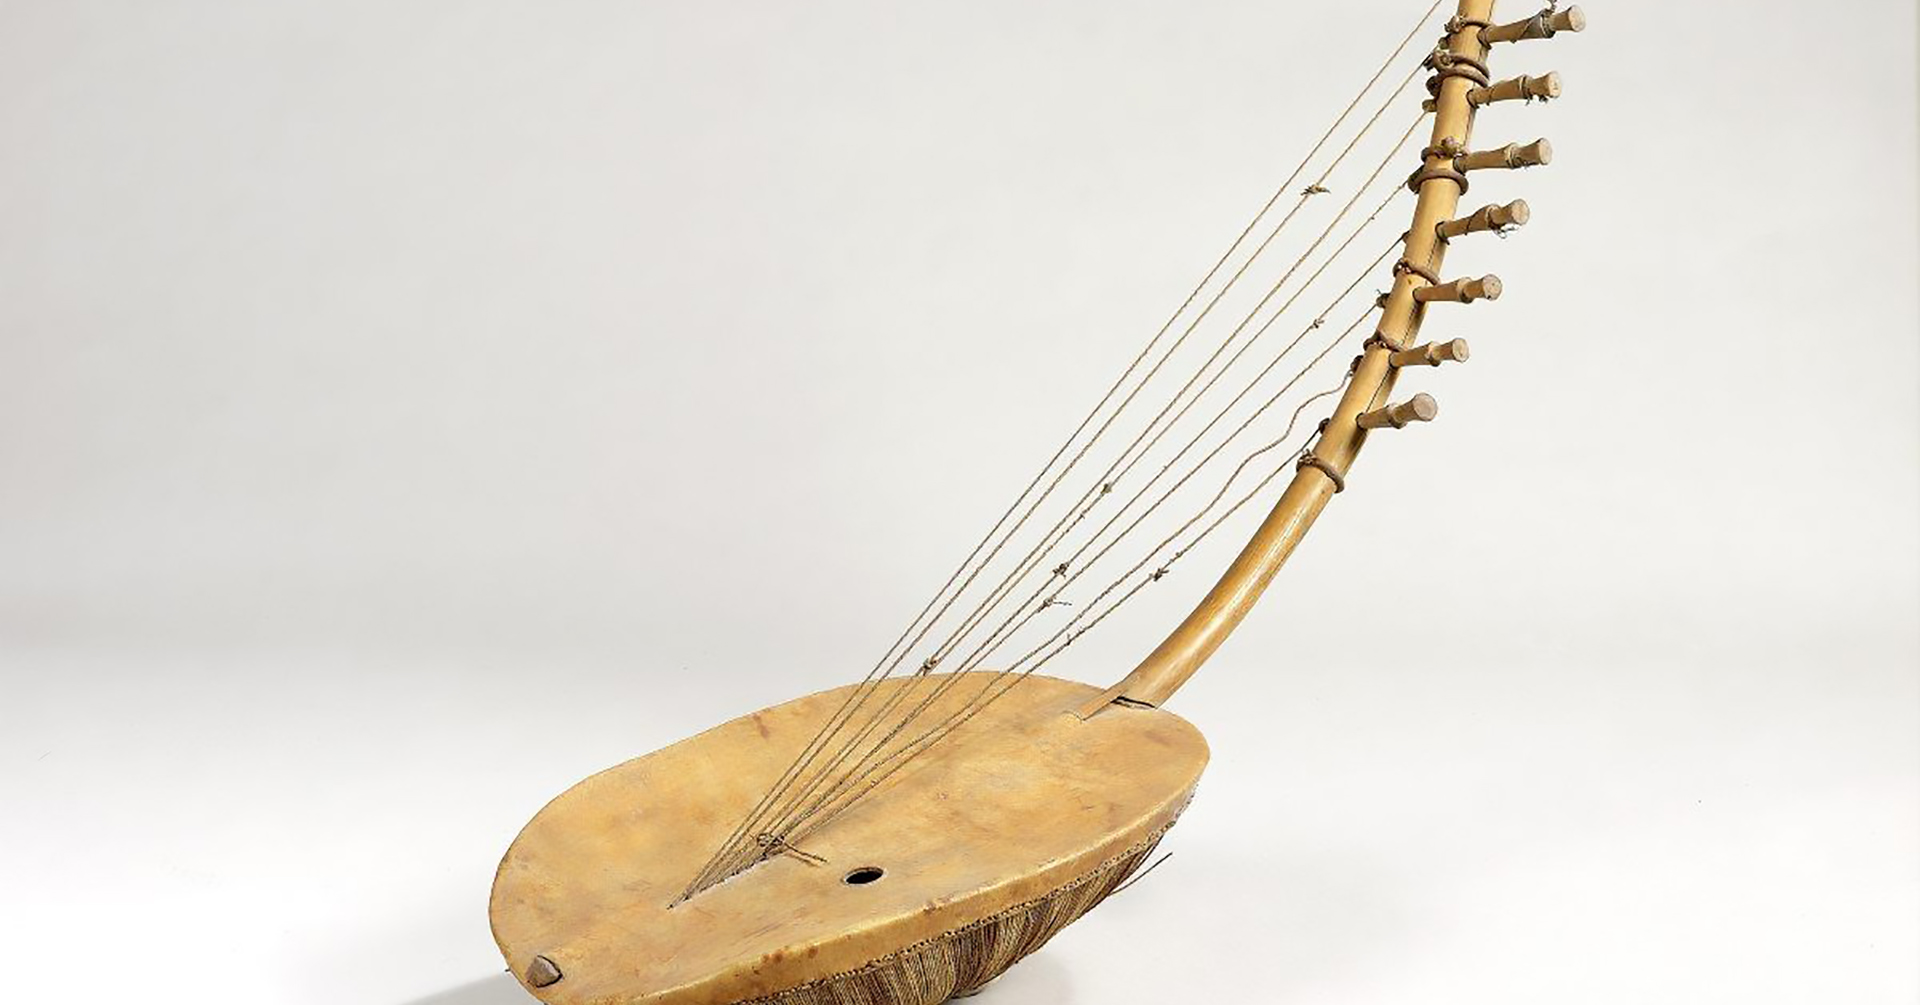 an ennanga, which is a wooden southeast asian harp with a curved neck and bowl-shaped resonator